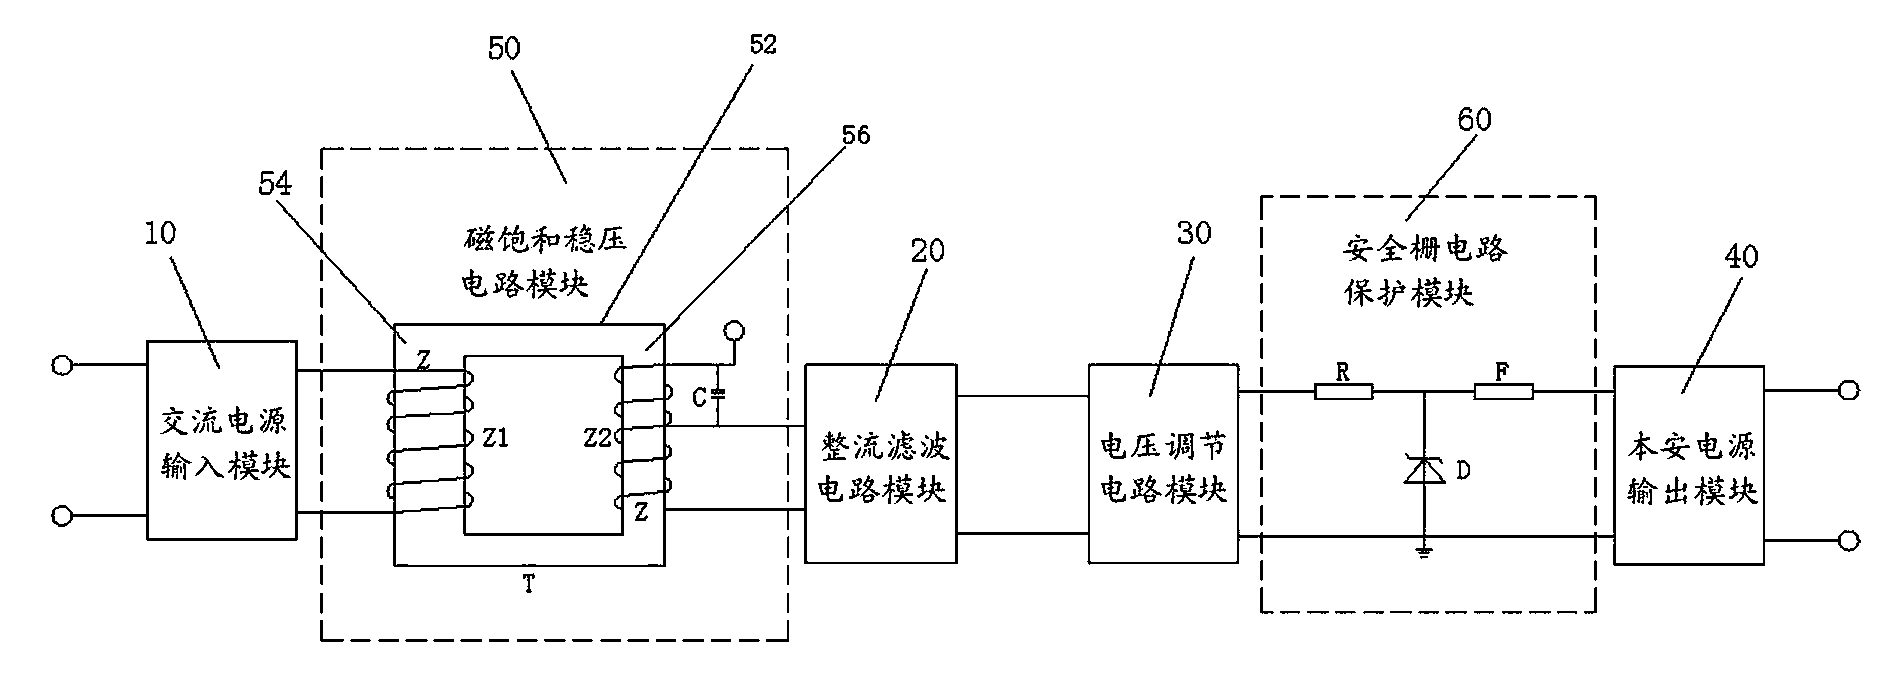 Magnetic-saturation intrinsically-safe power supply